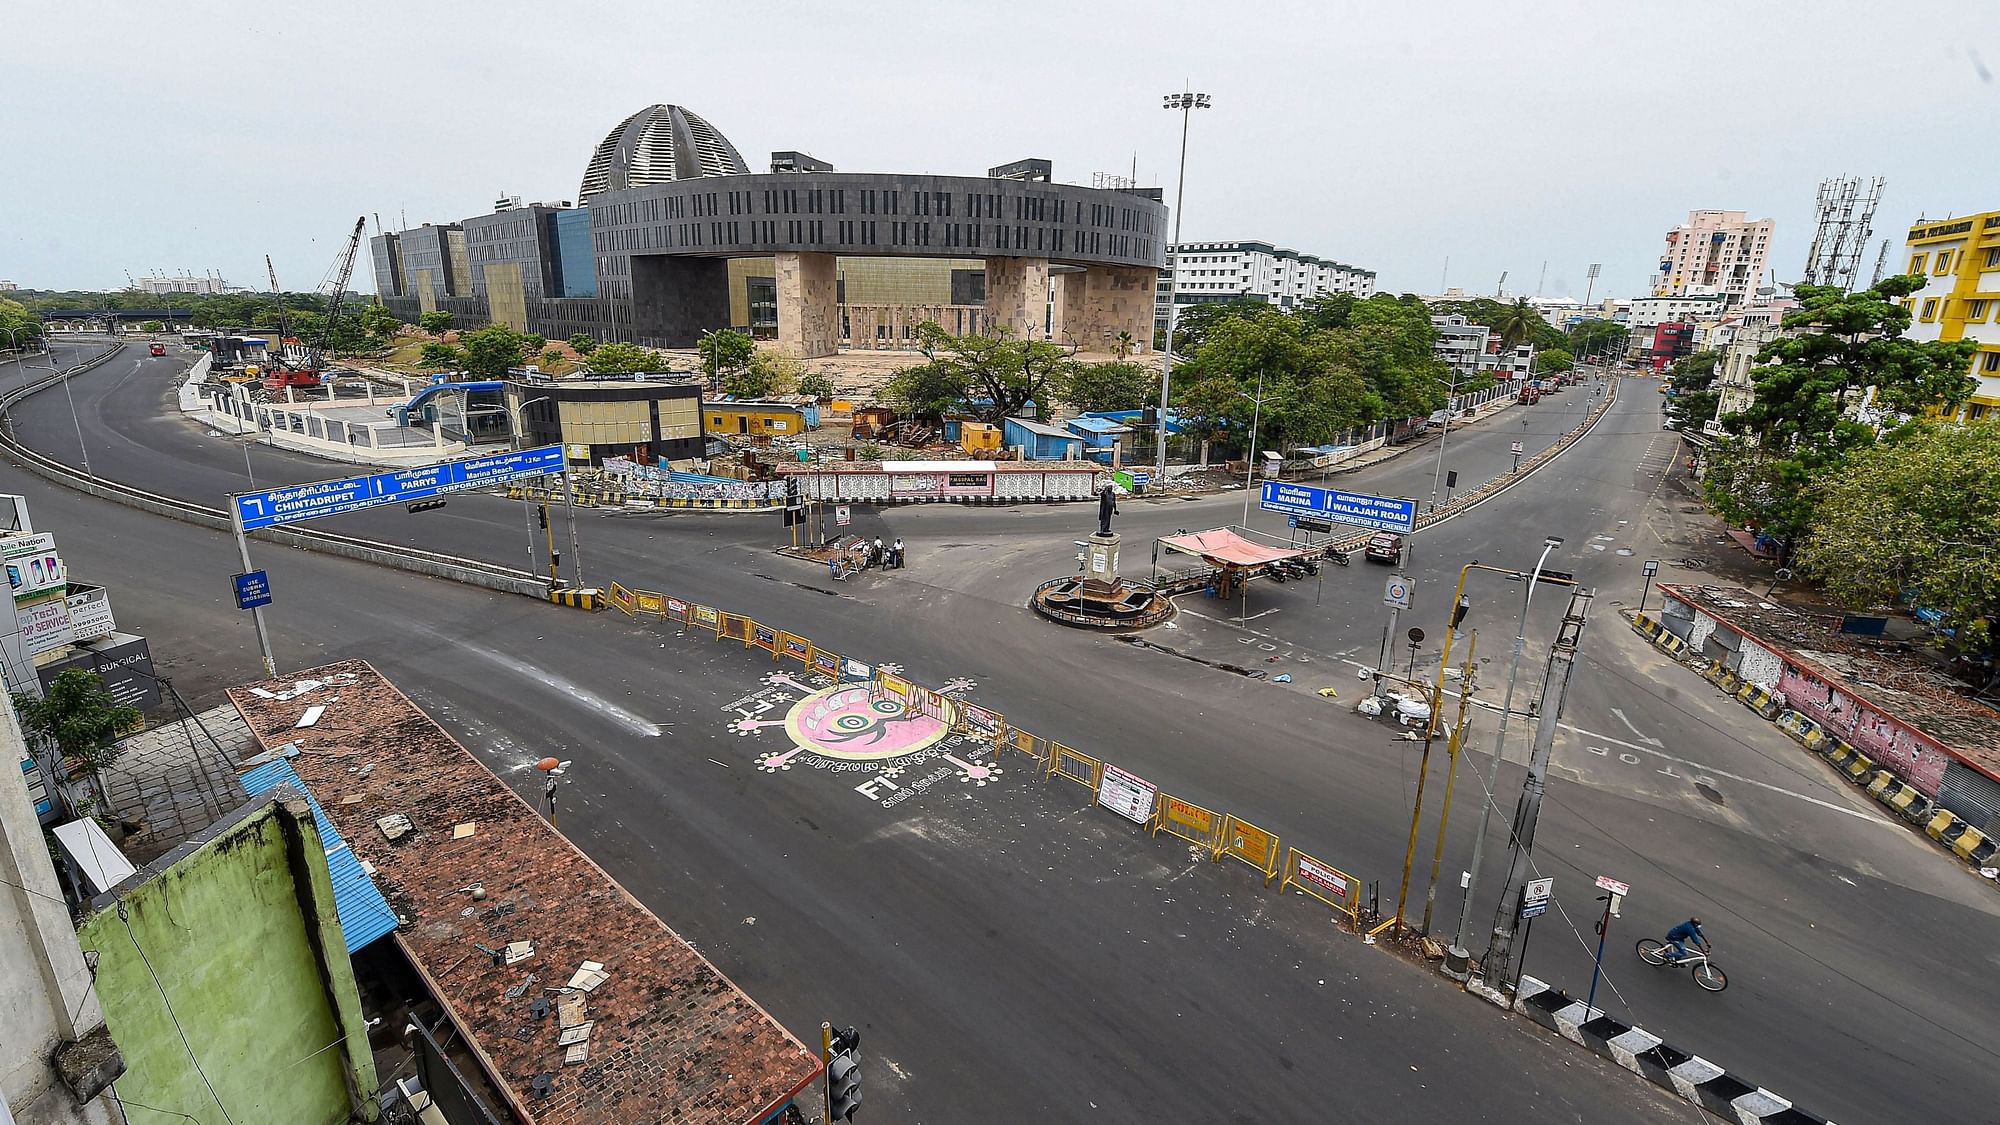 Chennai: A view of deserted roads during ongoing COVID-19 lockdown in Chennai Sunday, April 26, 2020.&nbsp;